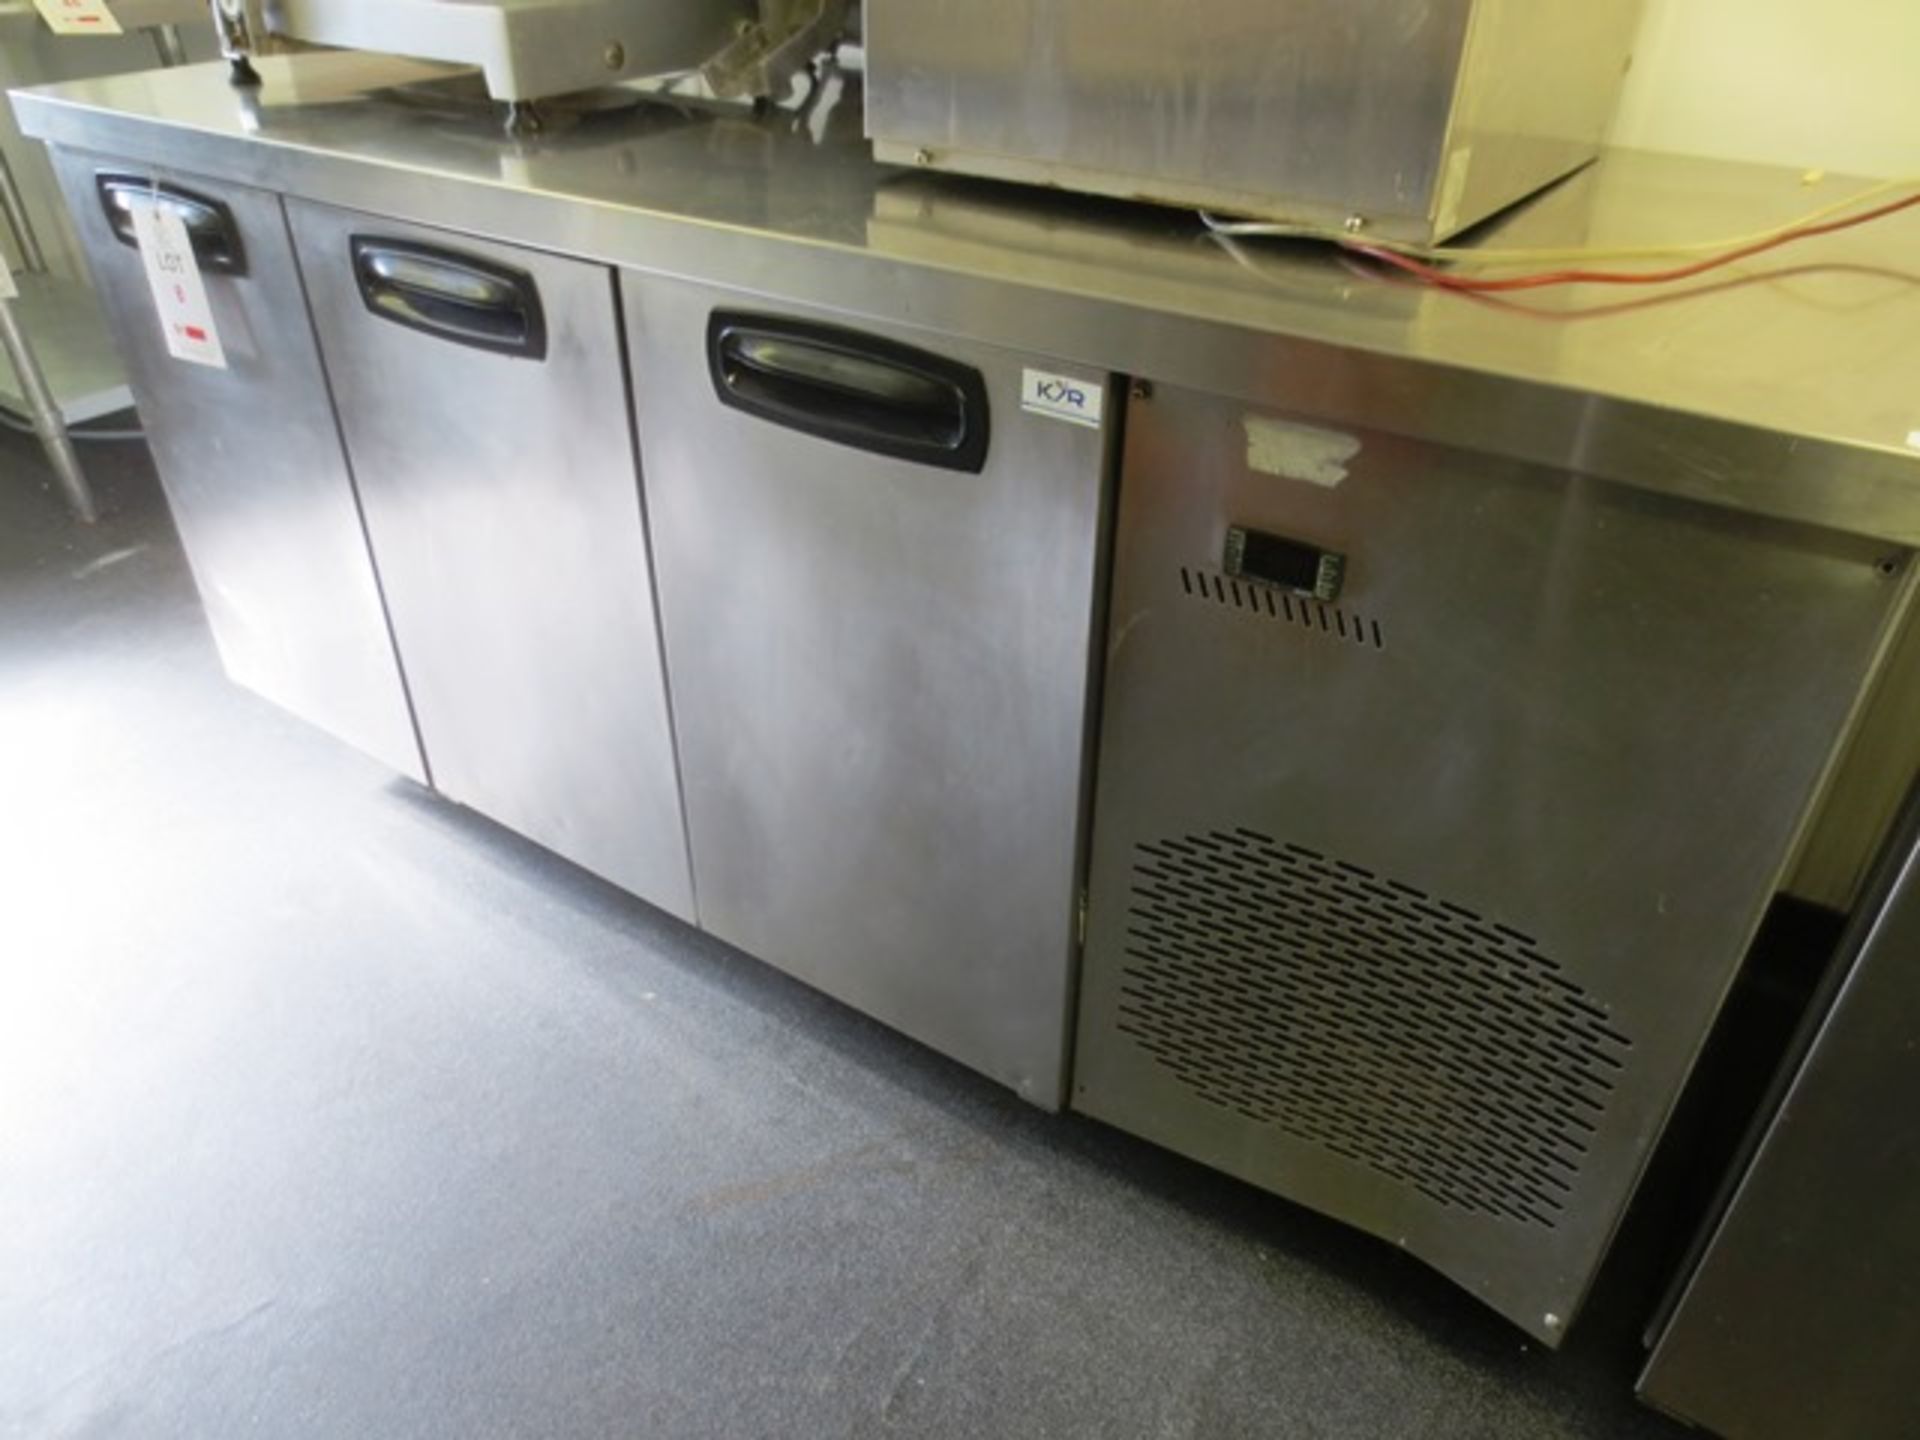 Stainless steel triple door refridgerated counter unit (240v), approx dimensions: 1800 x 700mm